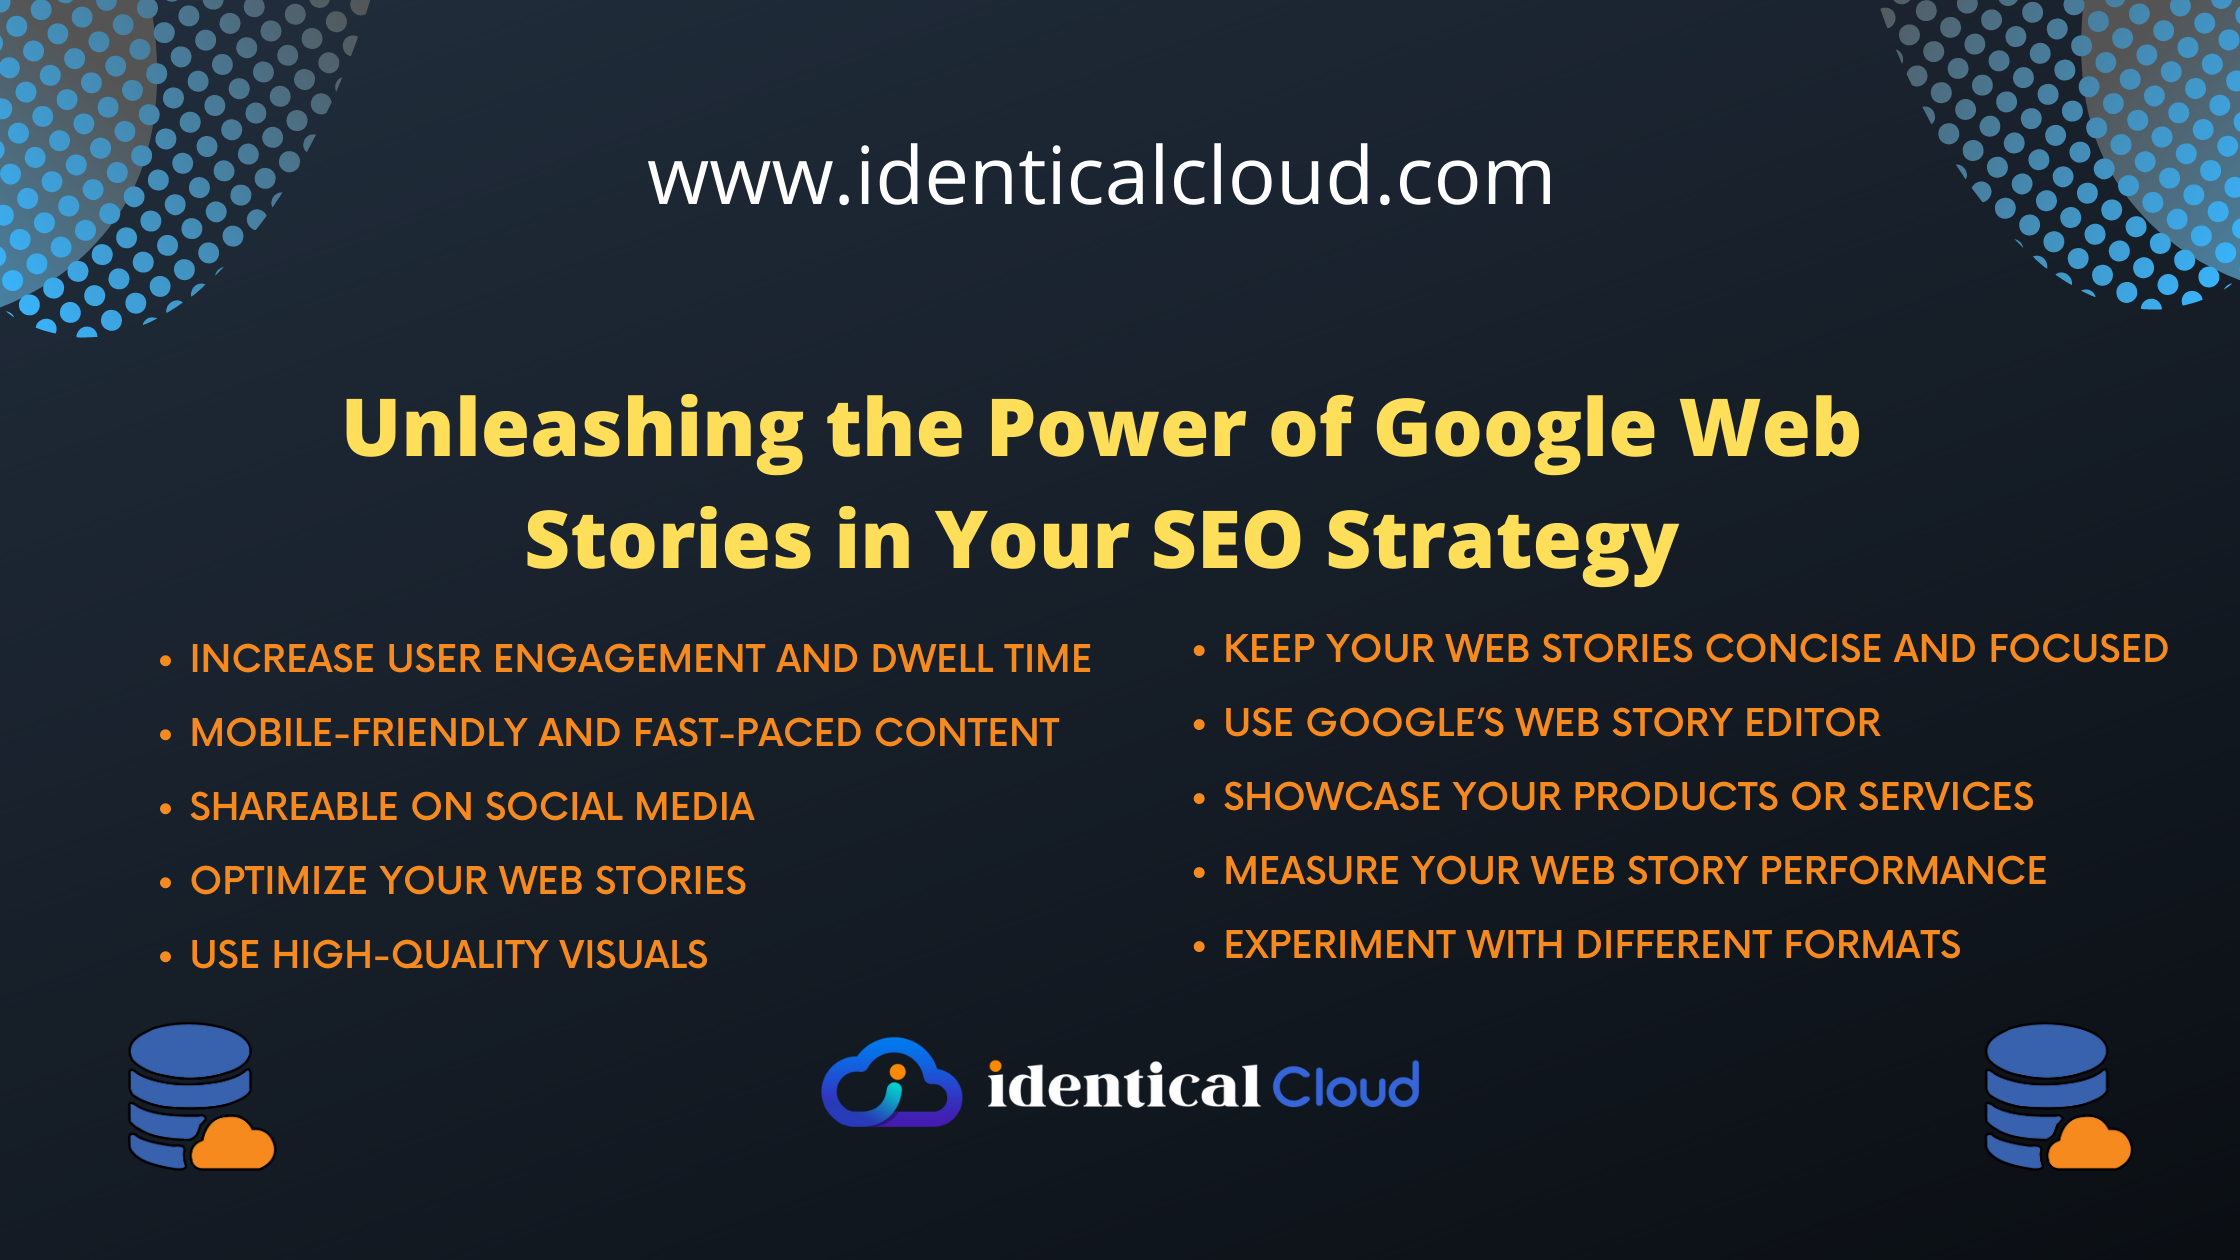 Unleashing the Power of Google Web Stories in Your SEO Strategy - identicalcloud.com